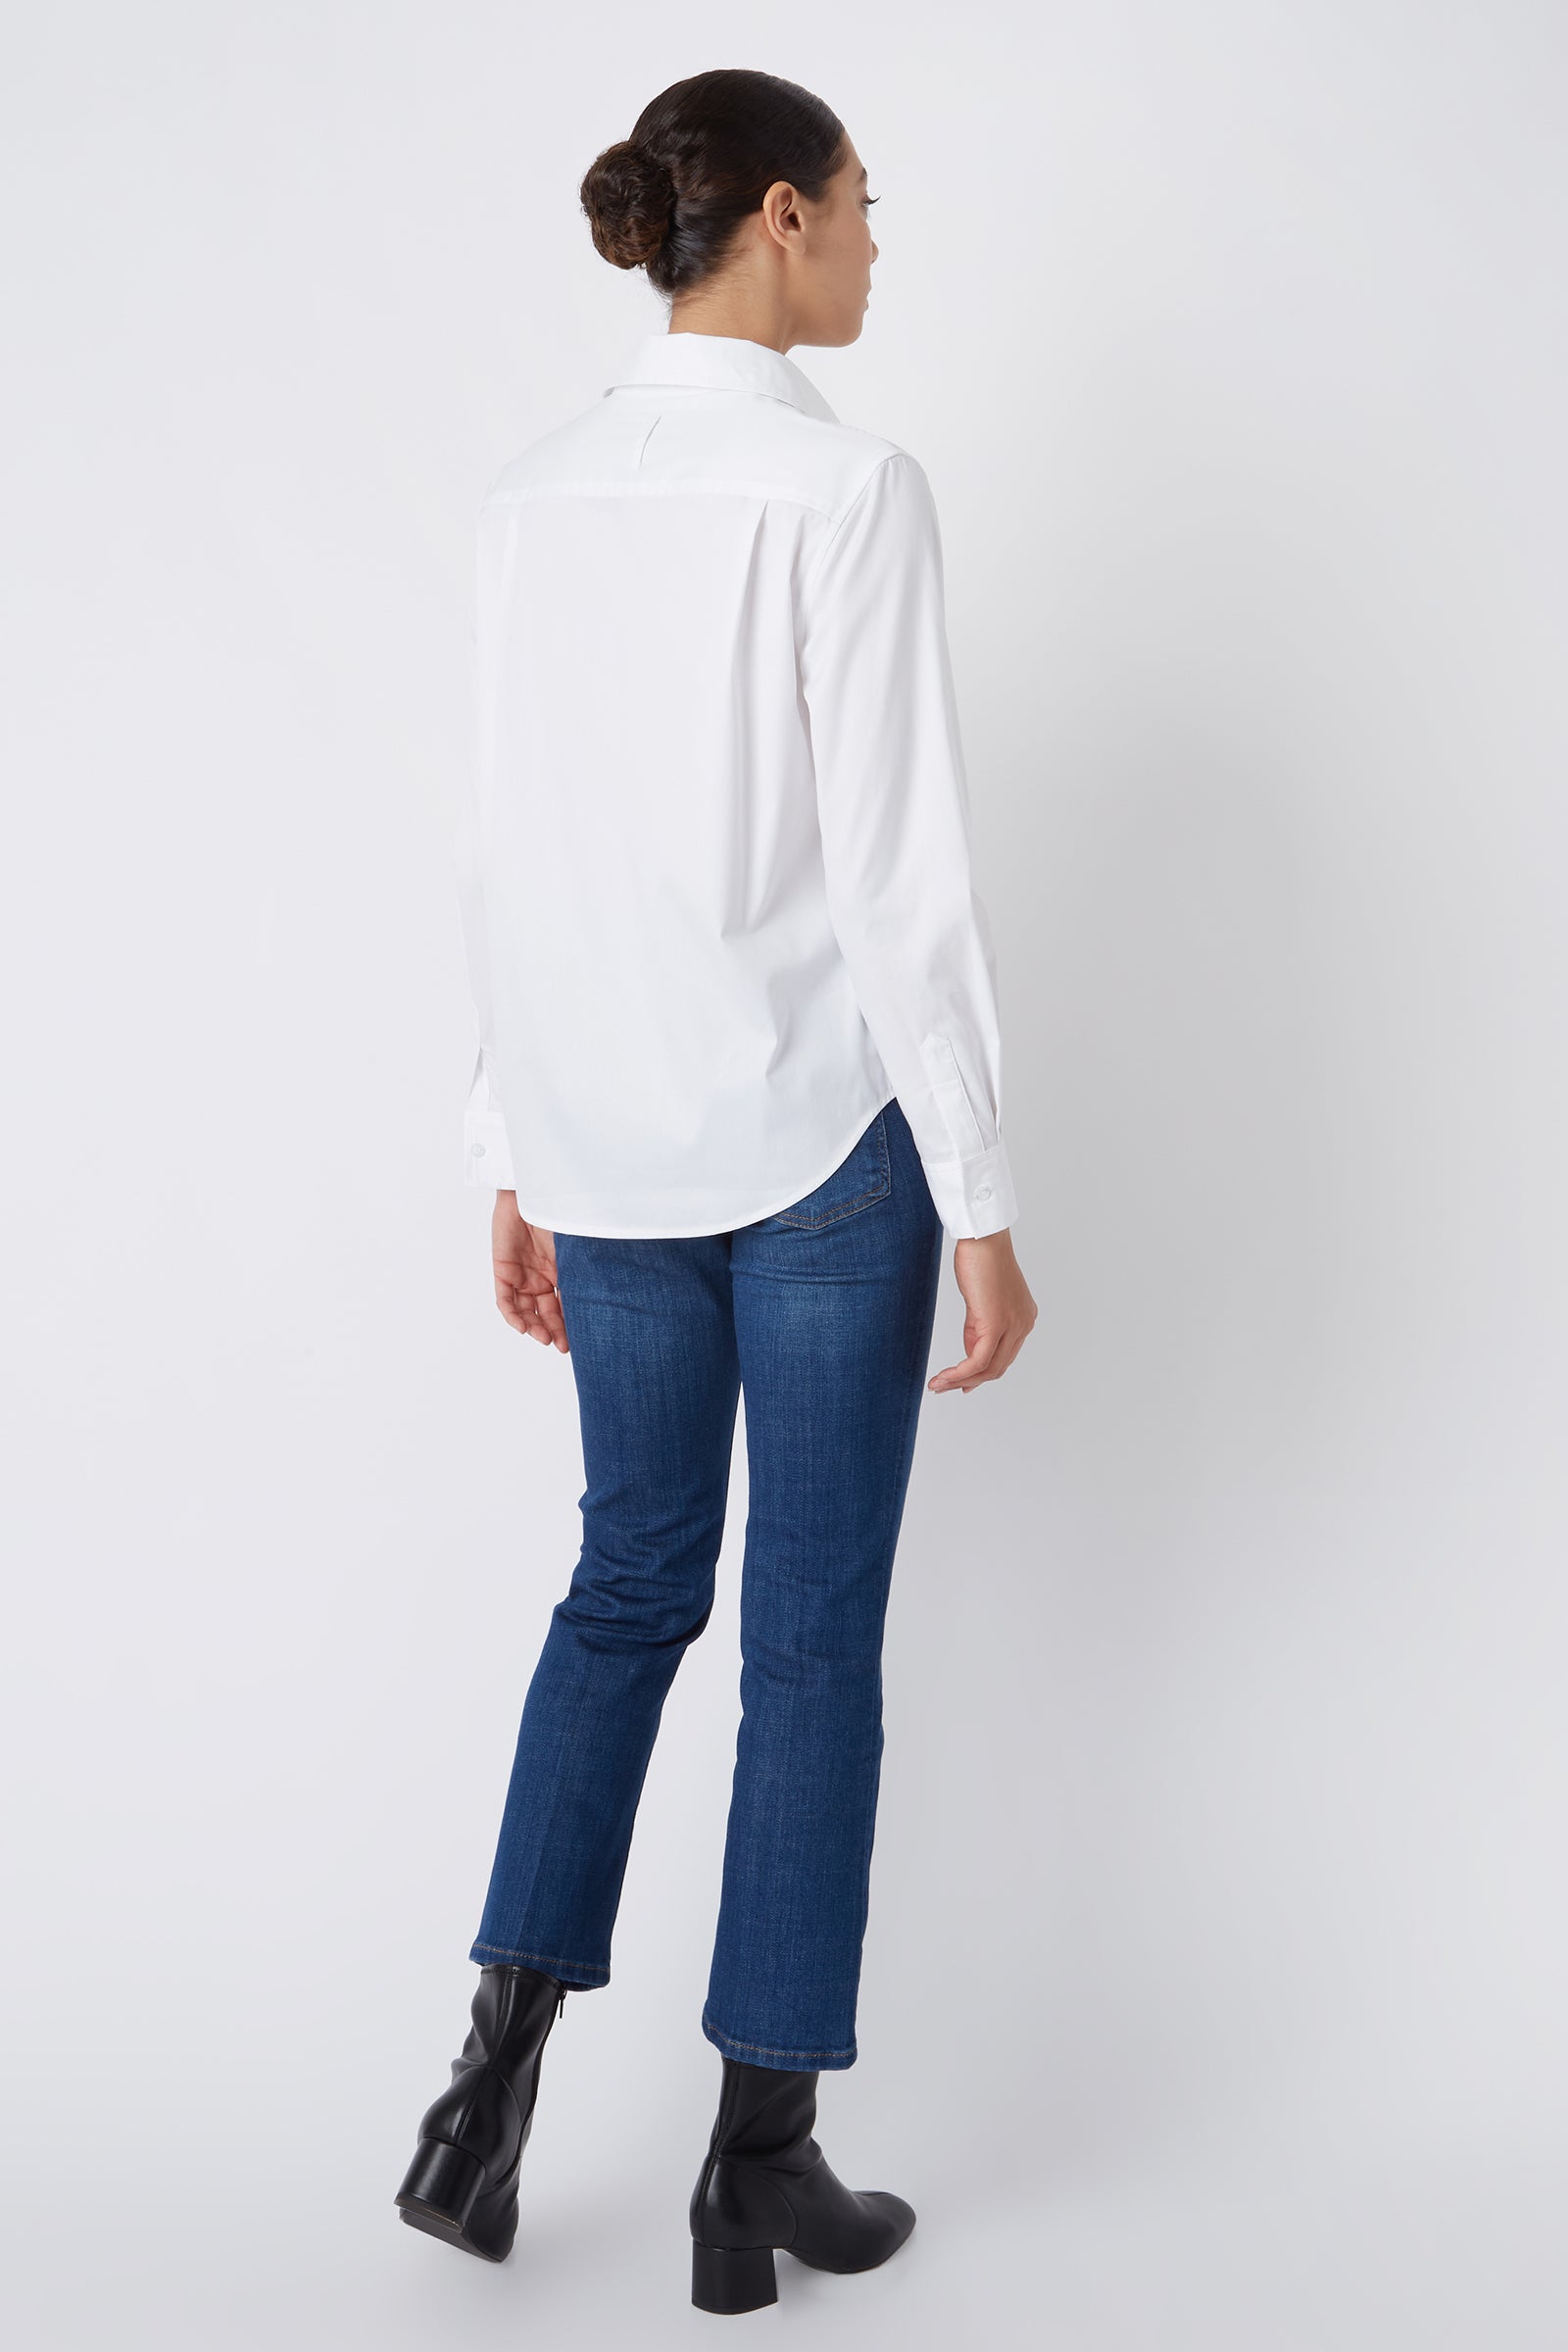 Kal Rieman Classic Tailored Shirt in White Pinpoint Oxford on Model Full Back View